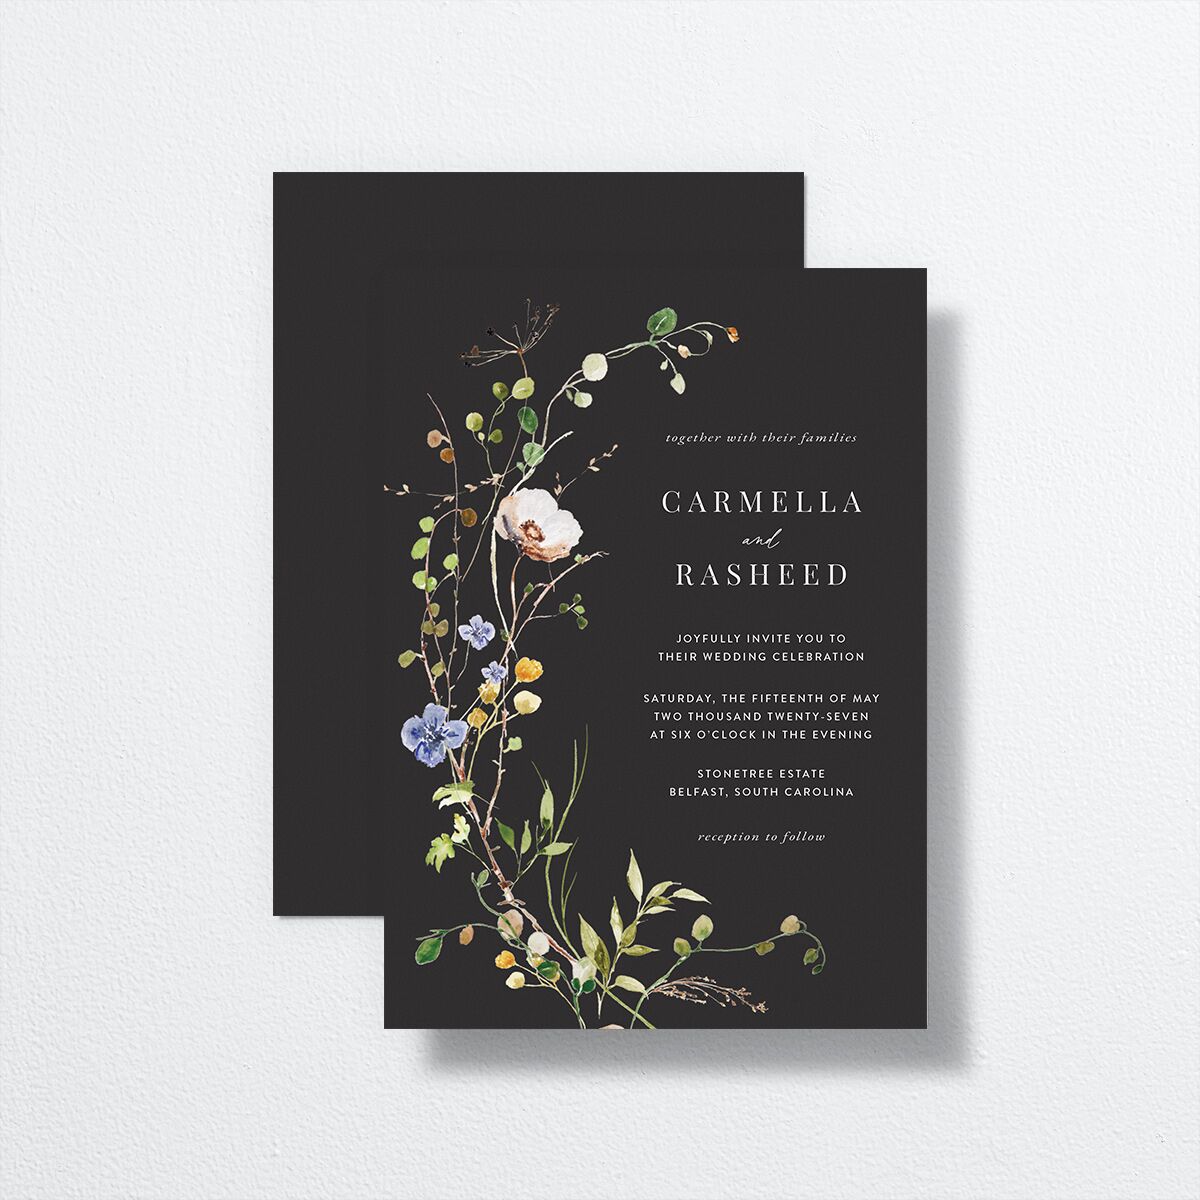 Delicate Wildflower Wedding Invitations | The Knot